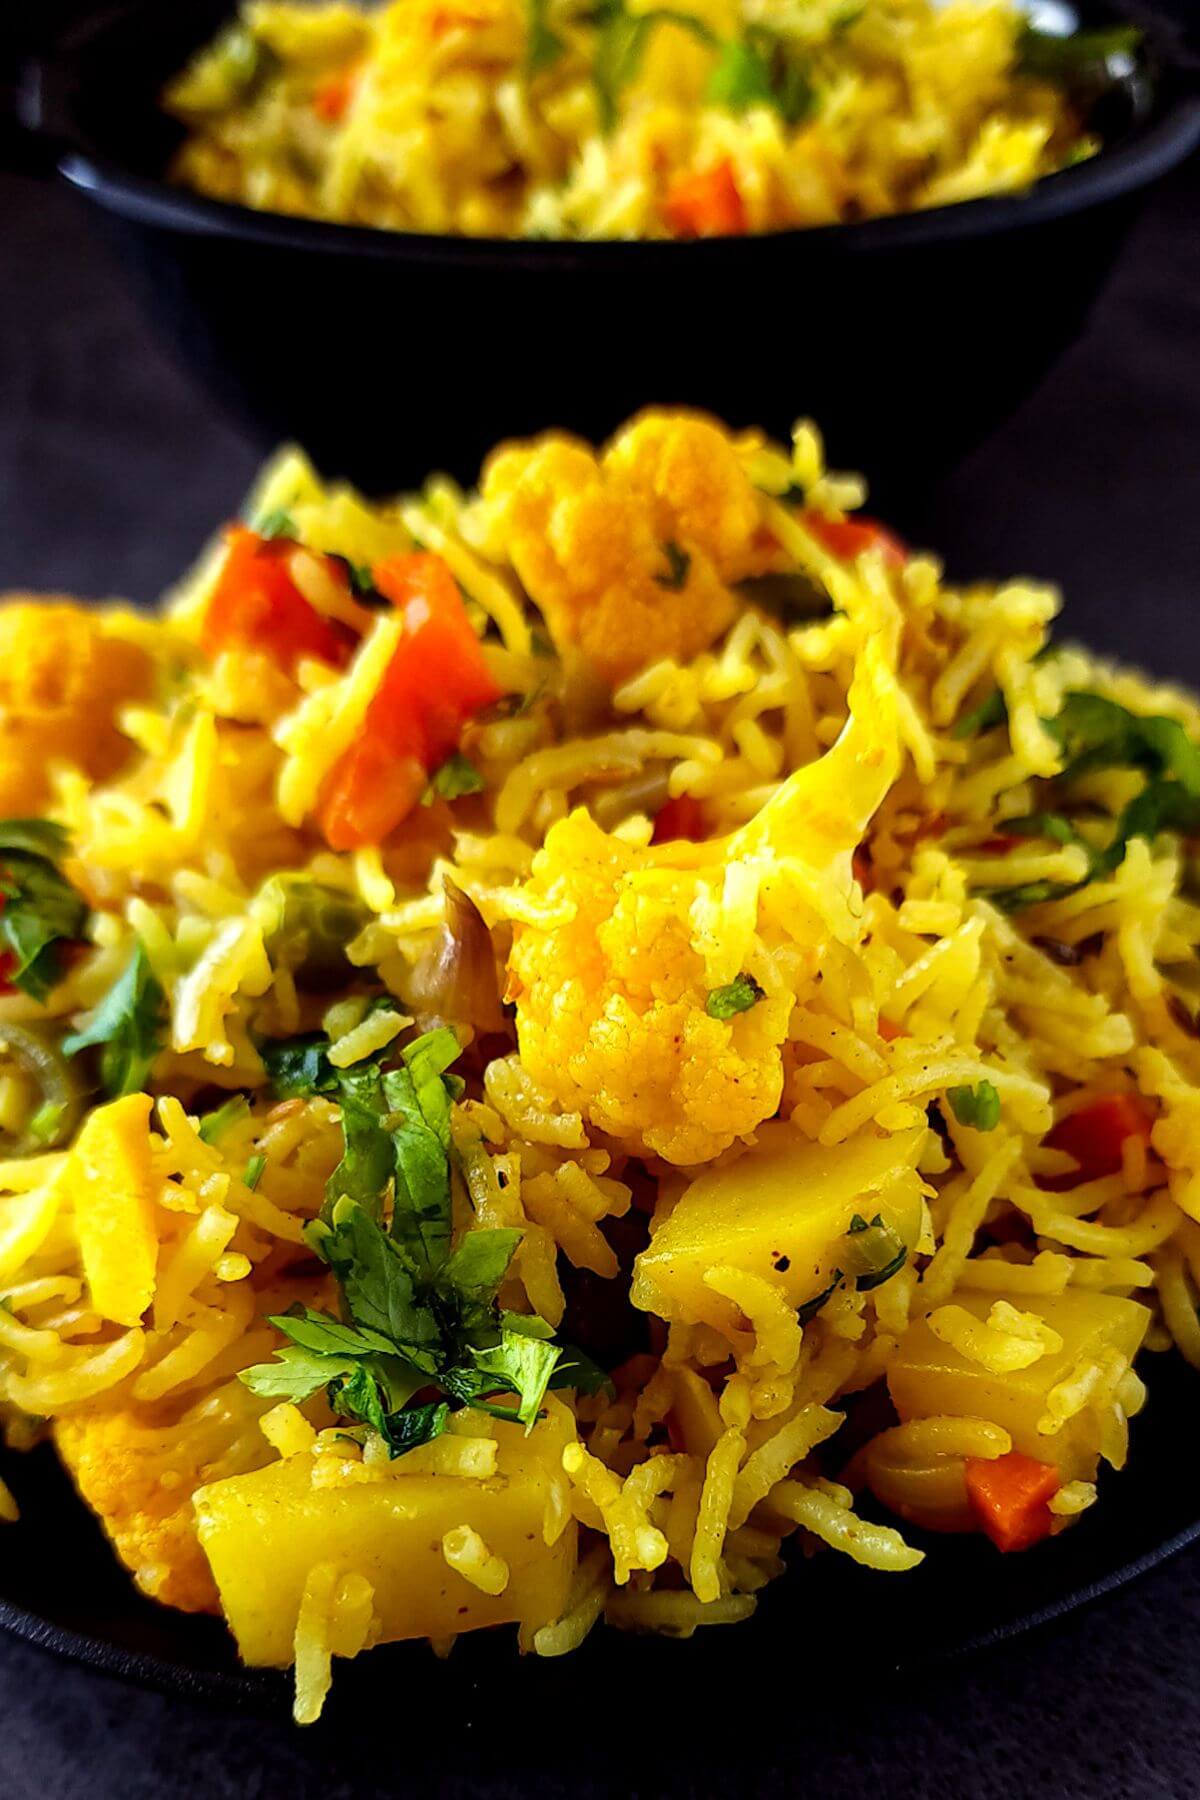 Spiced basmati rice with vegetables served on a black plate.